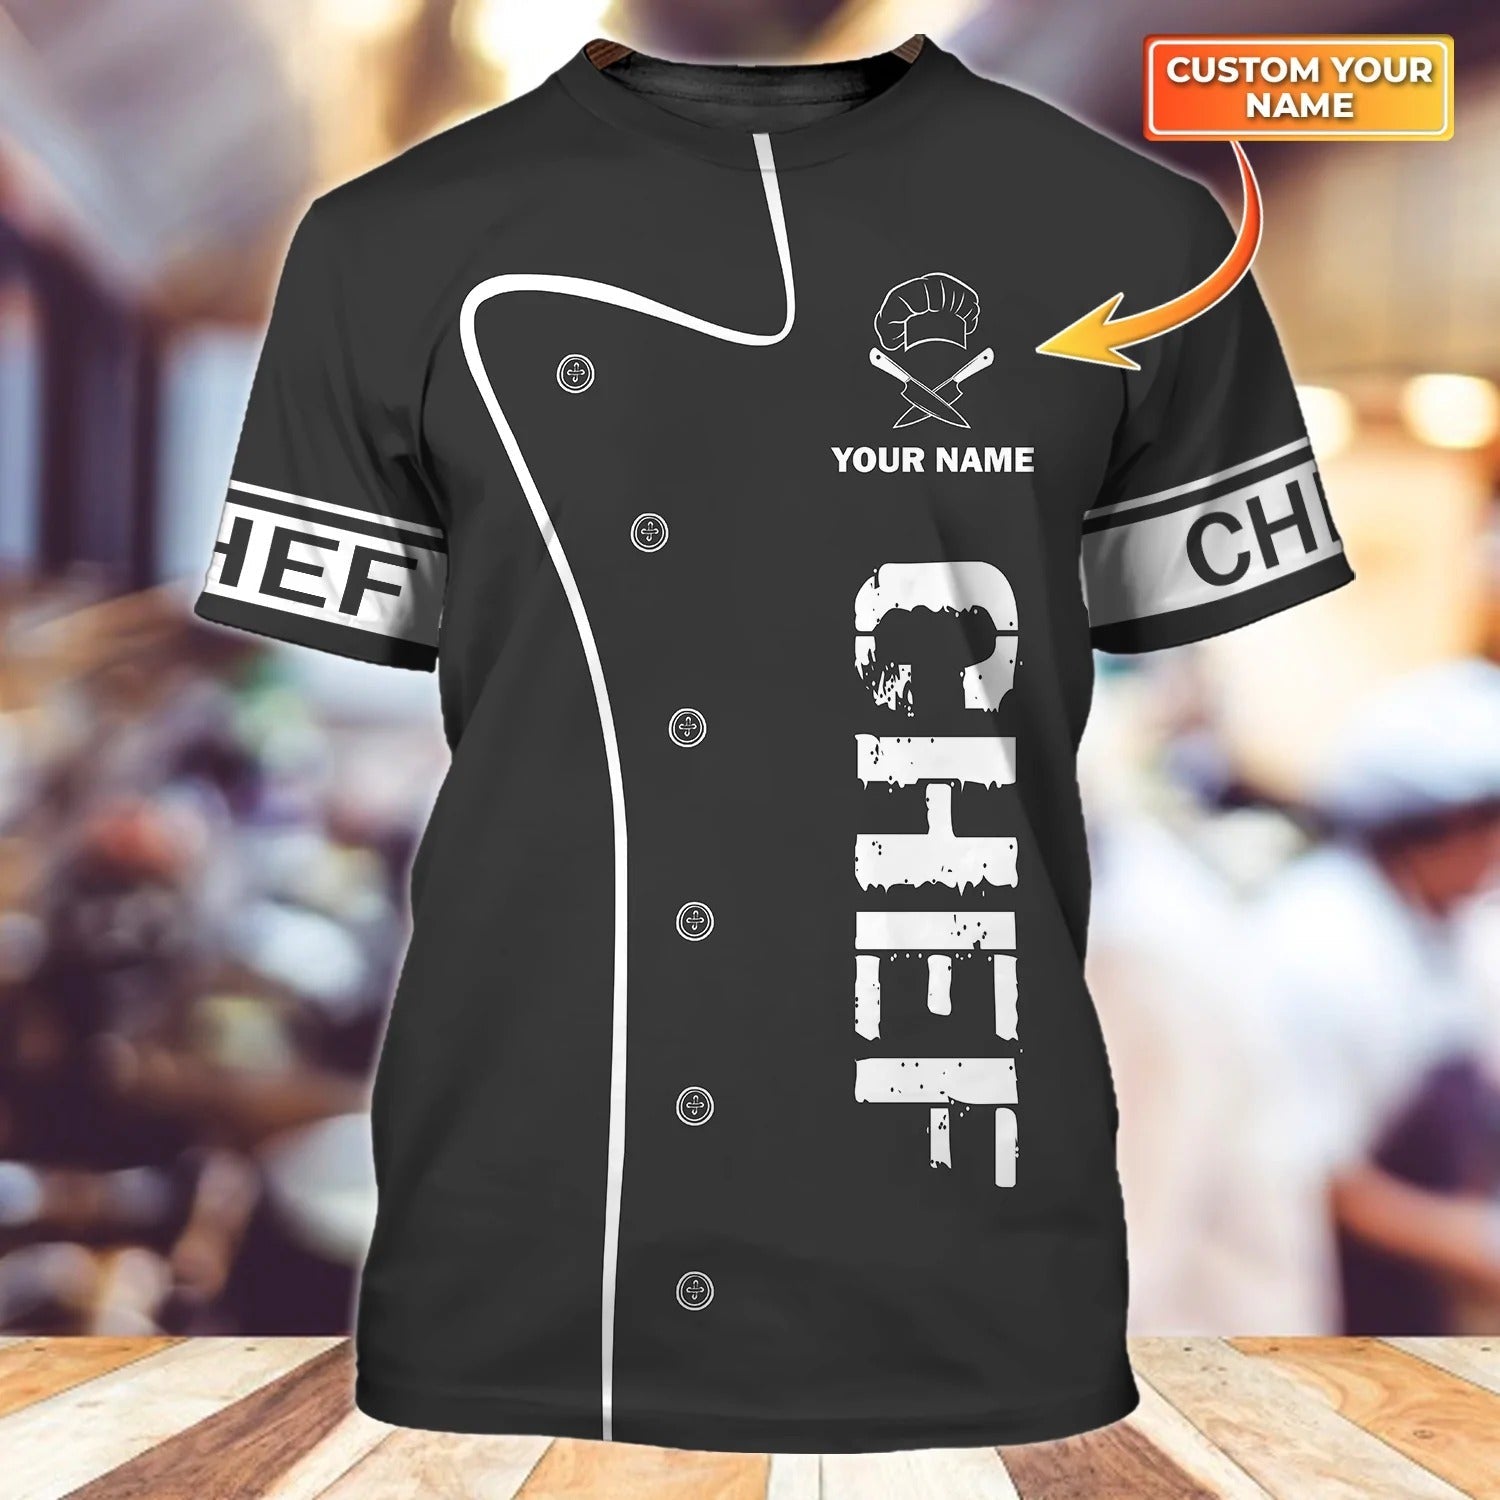 Customized With Name 3D Chef Shirt/ Black T Shirt For A Master Chef/ Unisex 3D Chef Shirt/ Gift Fir Chef